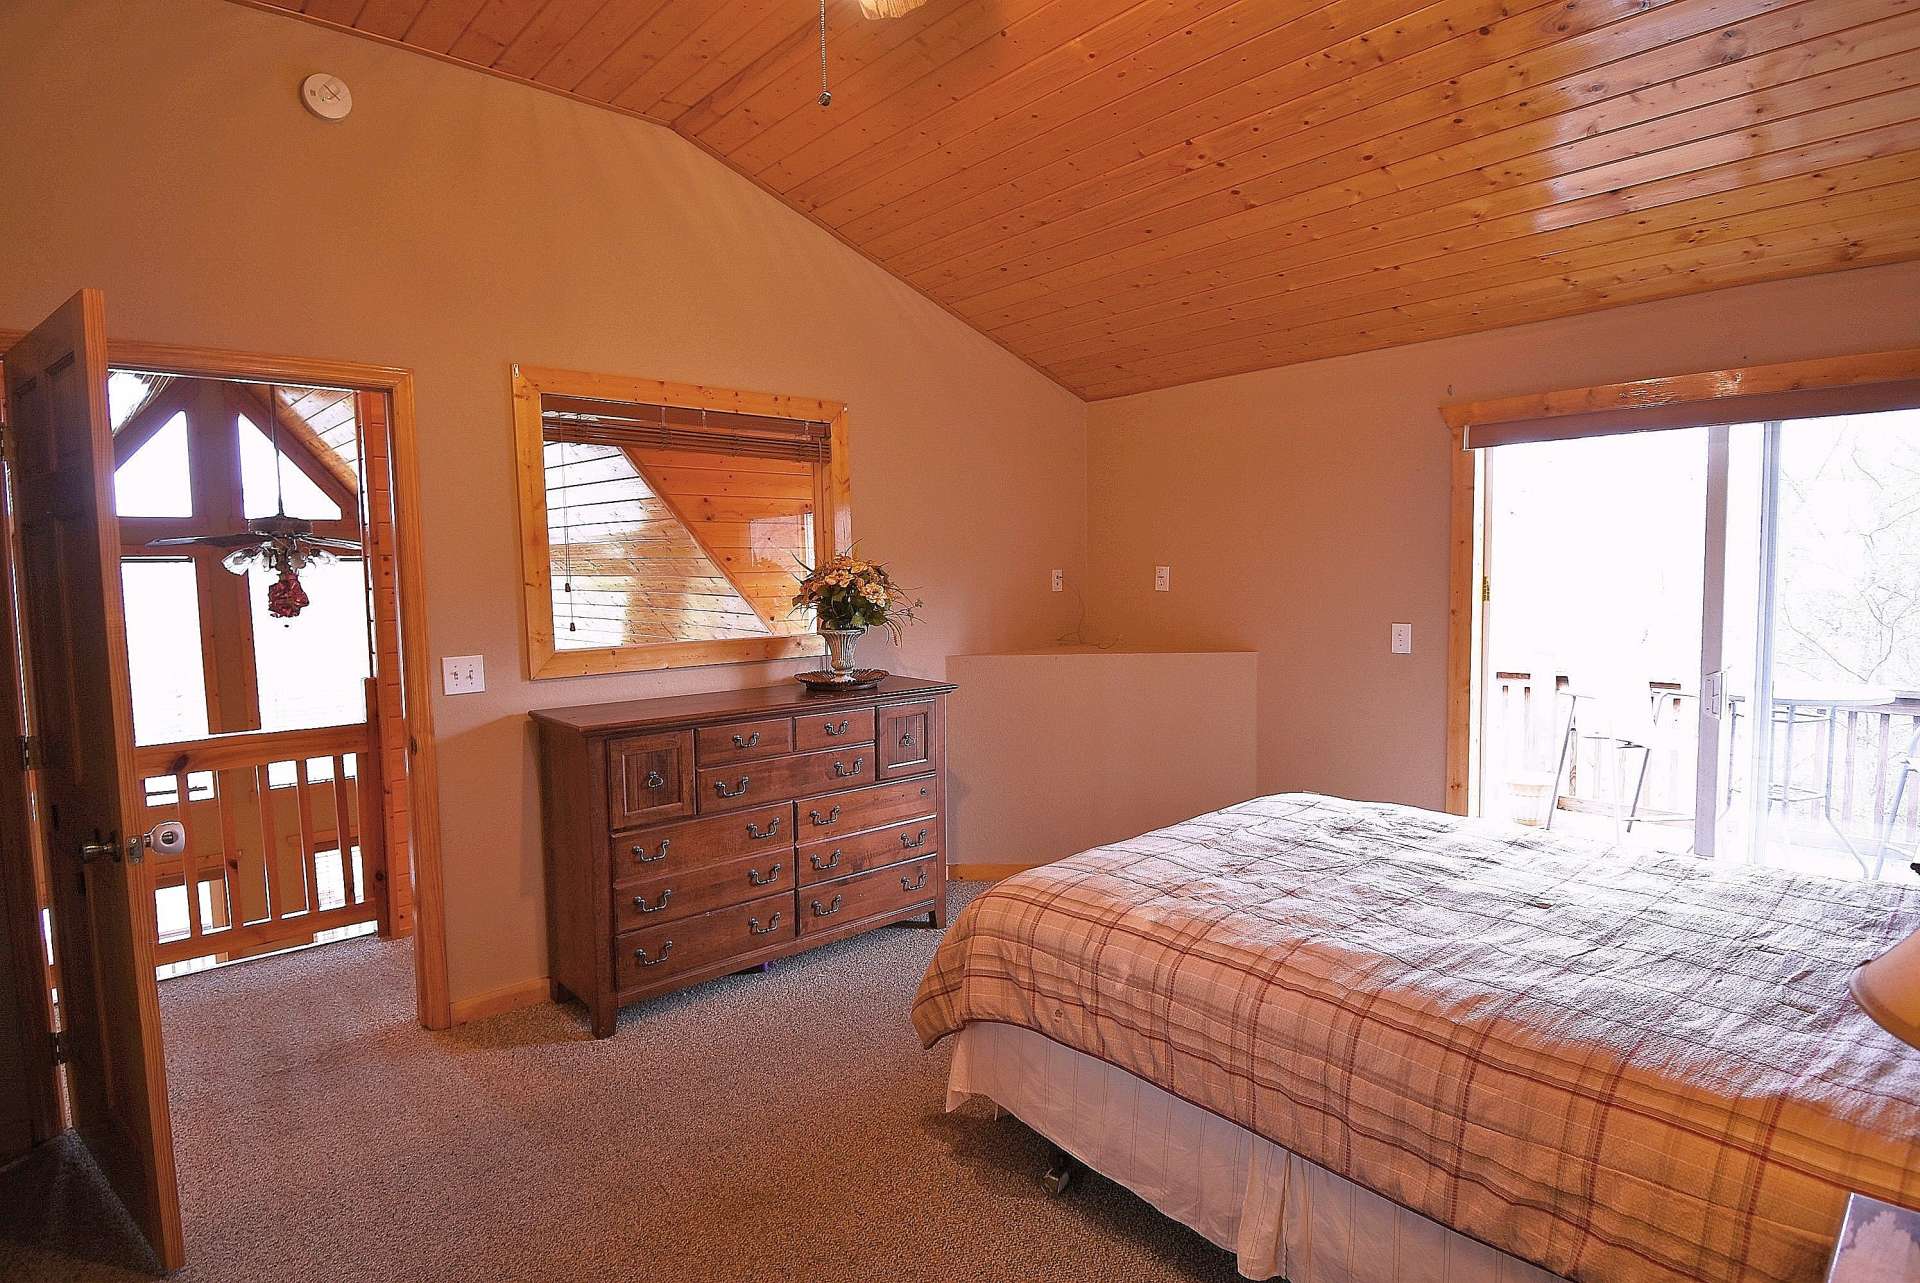 The master suite is located on the upper level and offers a private bath and access to a private balcony.